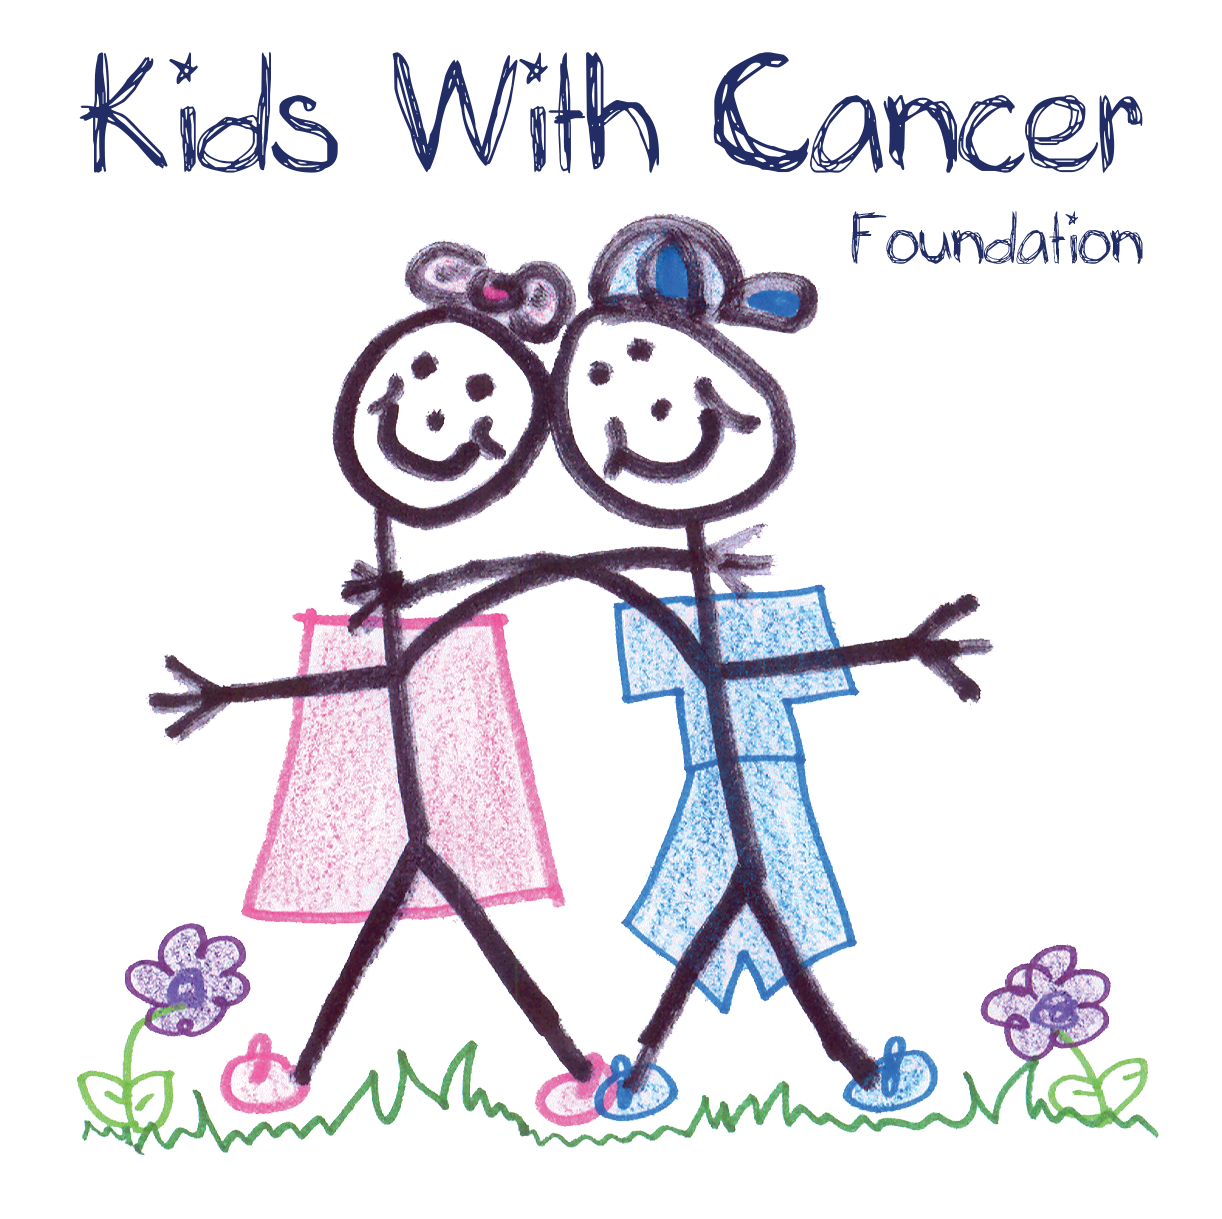 Kids with Cancer